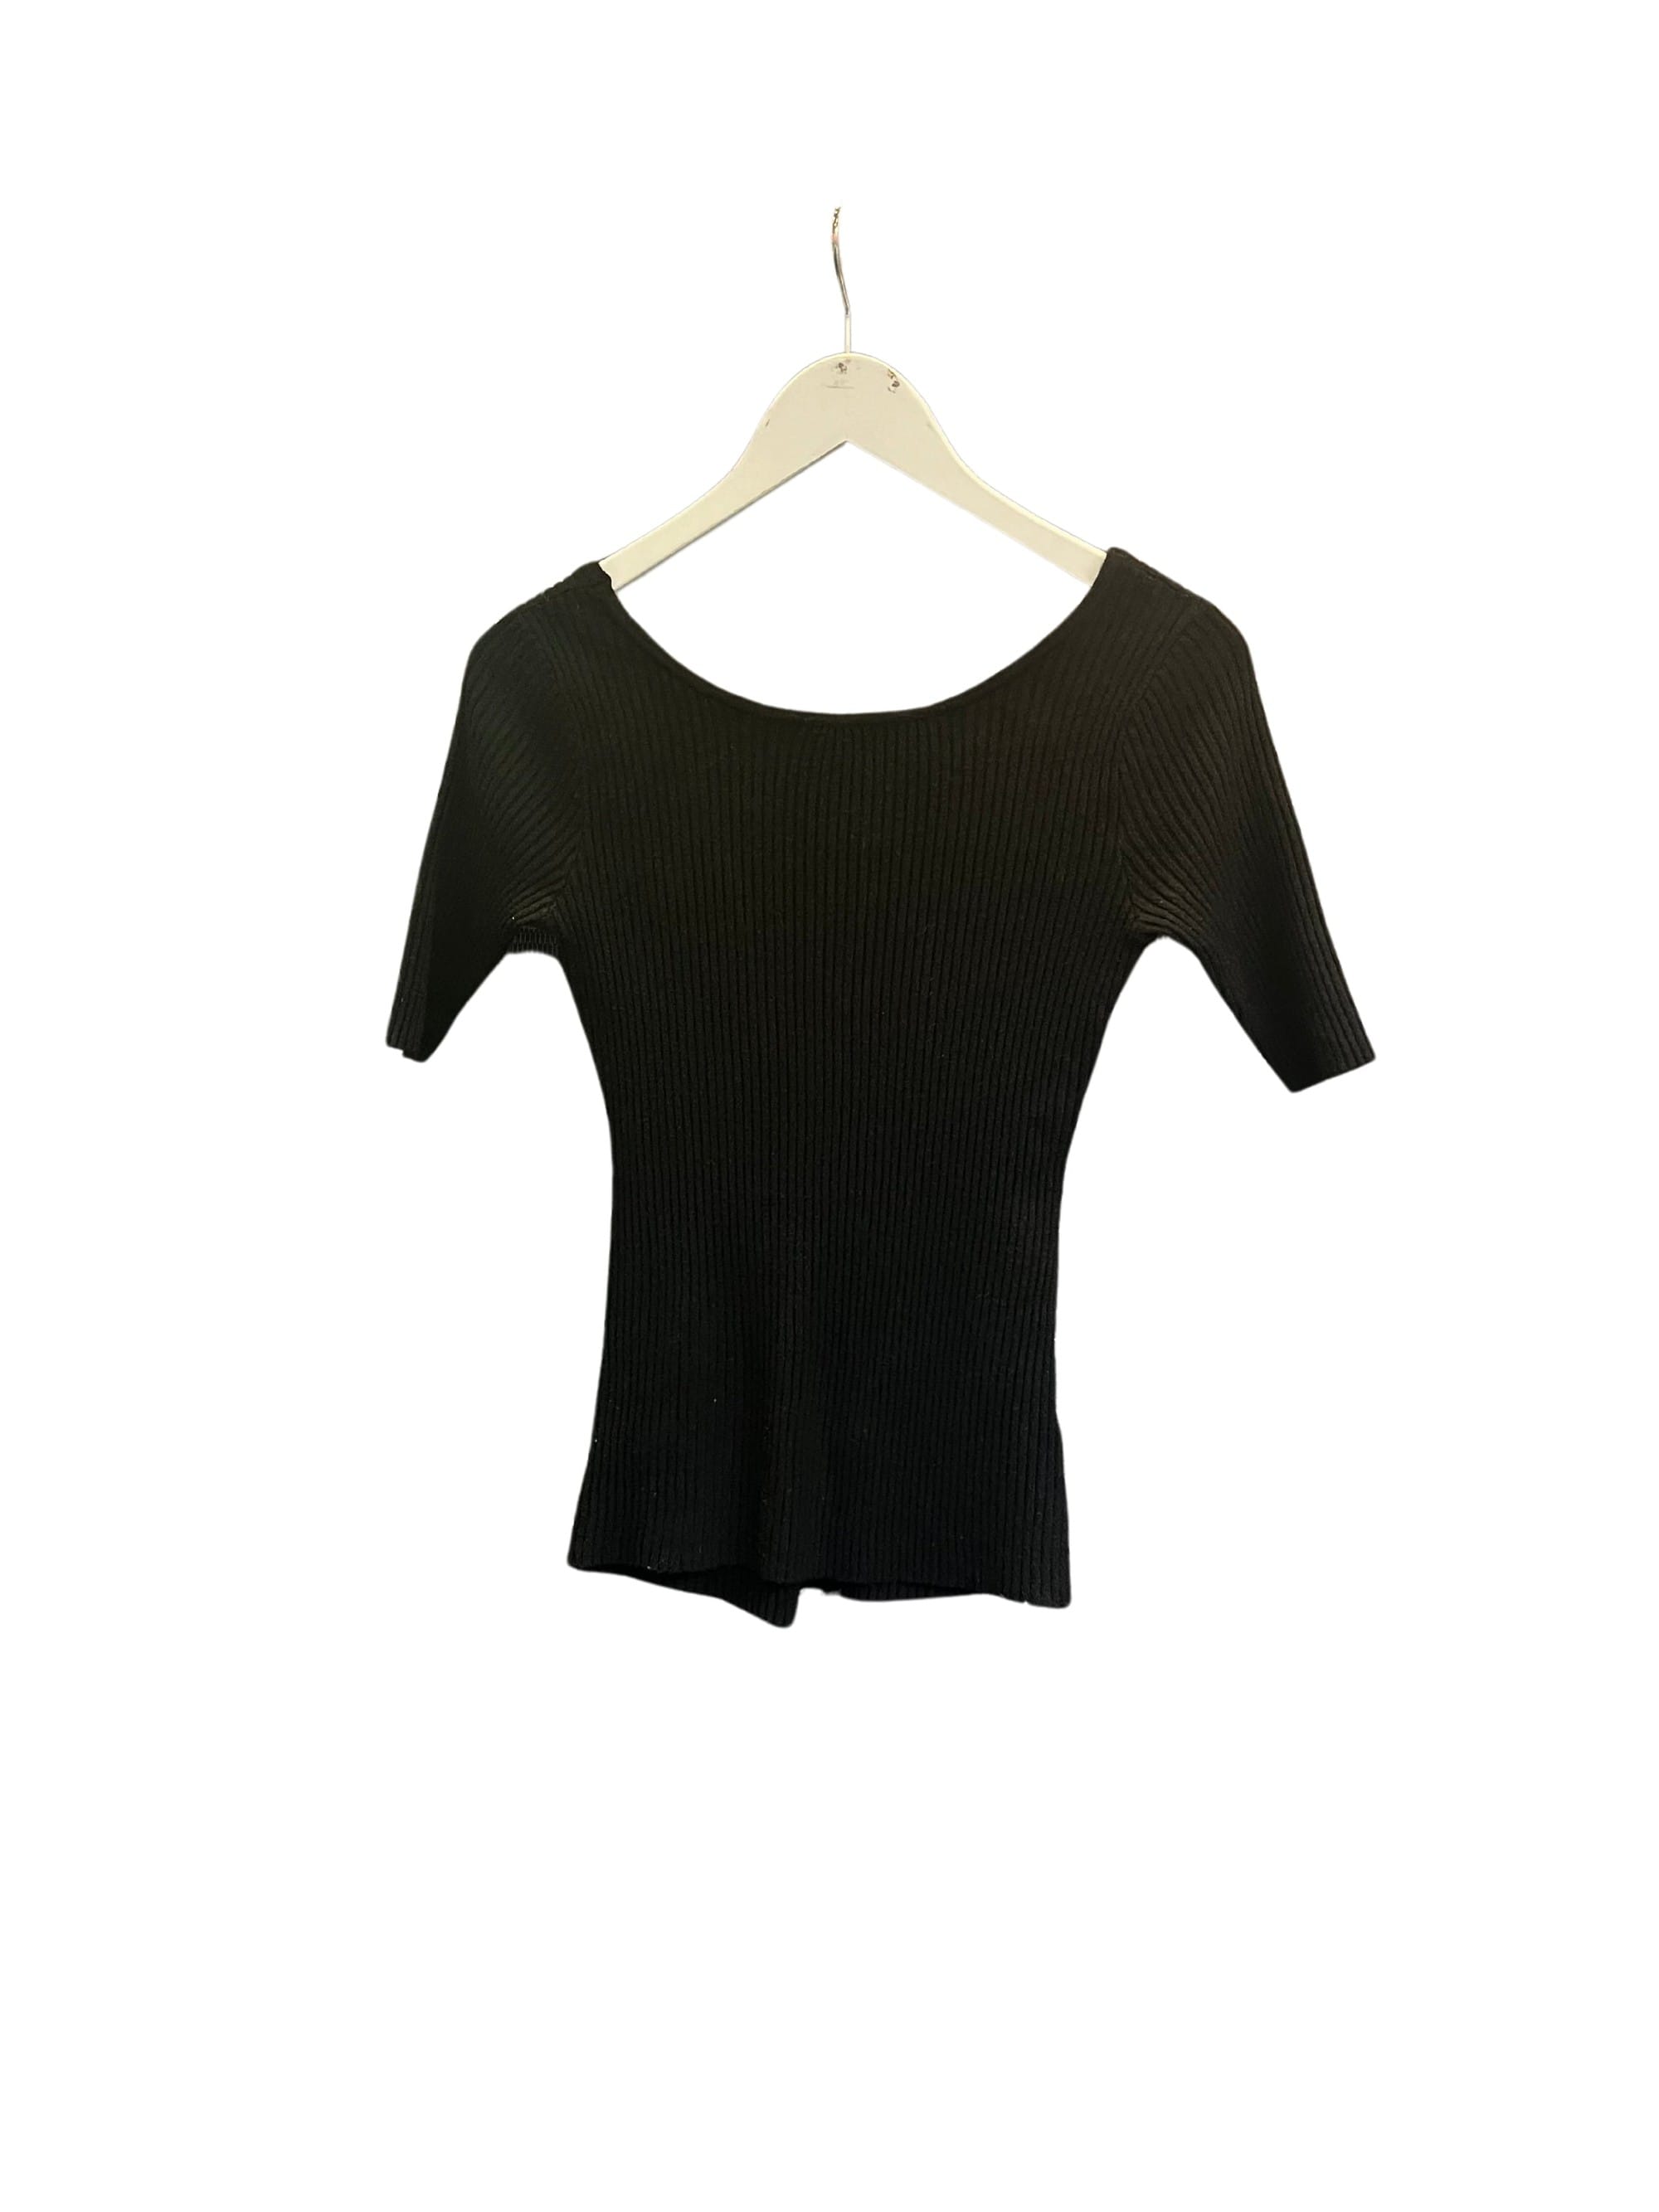 Clever Alice Backless Top in Black - clever alice